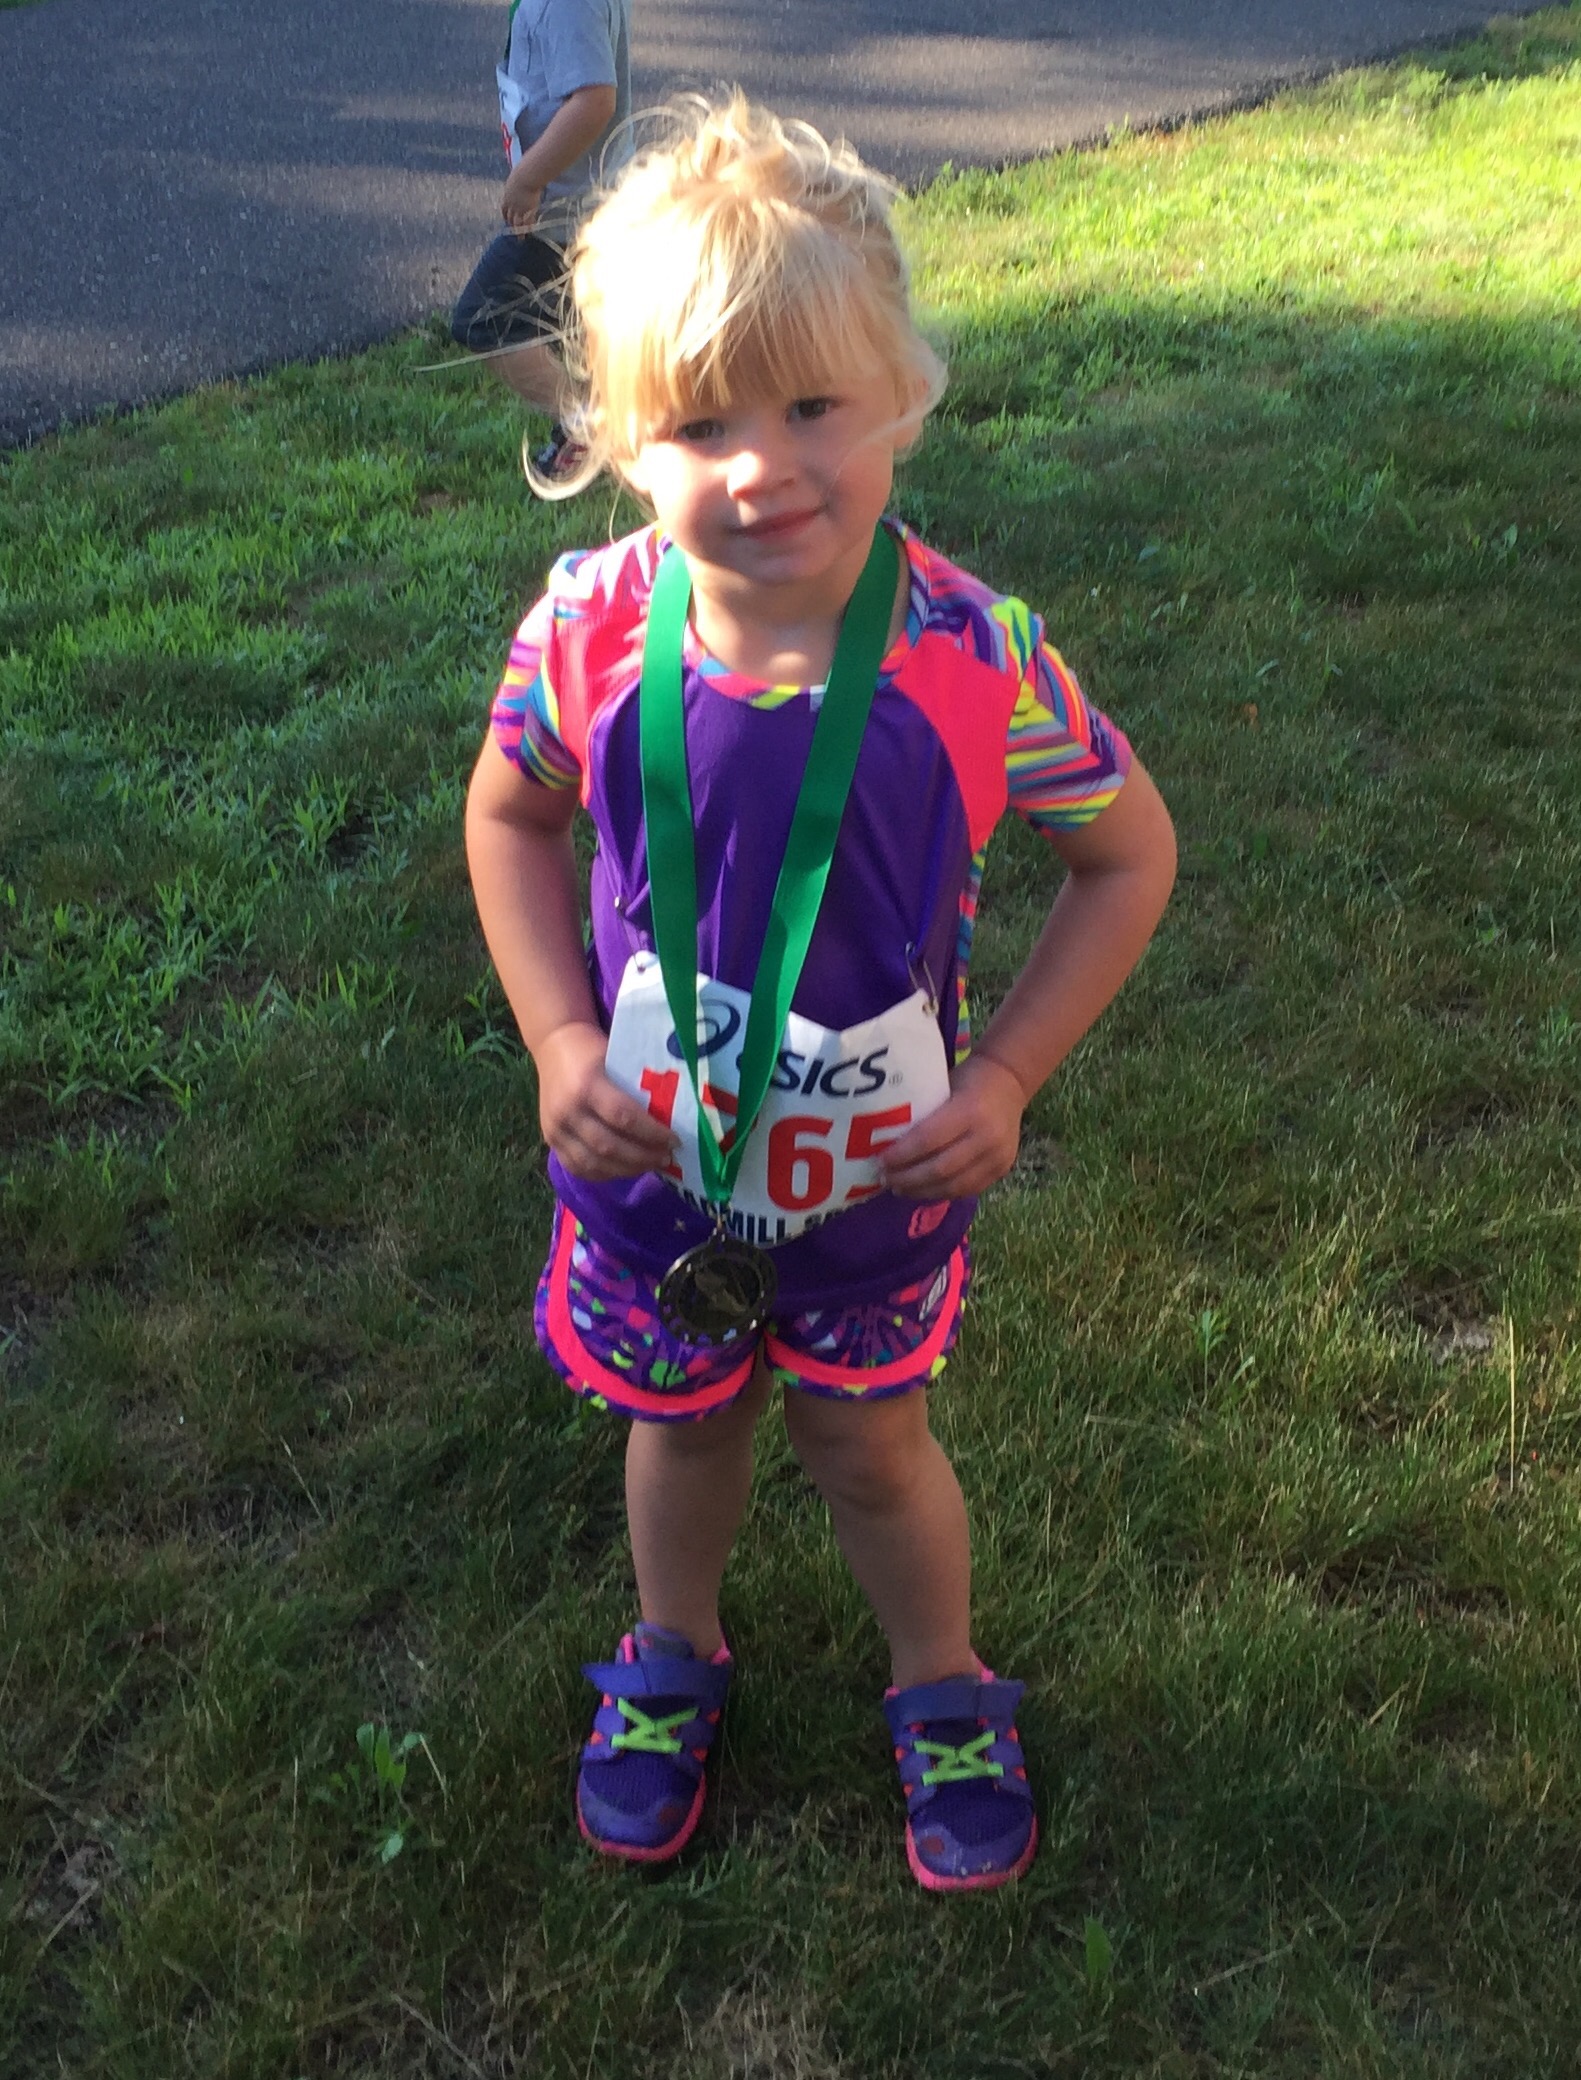 Kenley showing off her medal after her 3rd race (age 3)